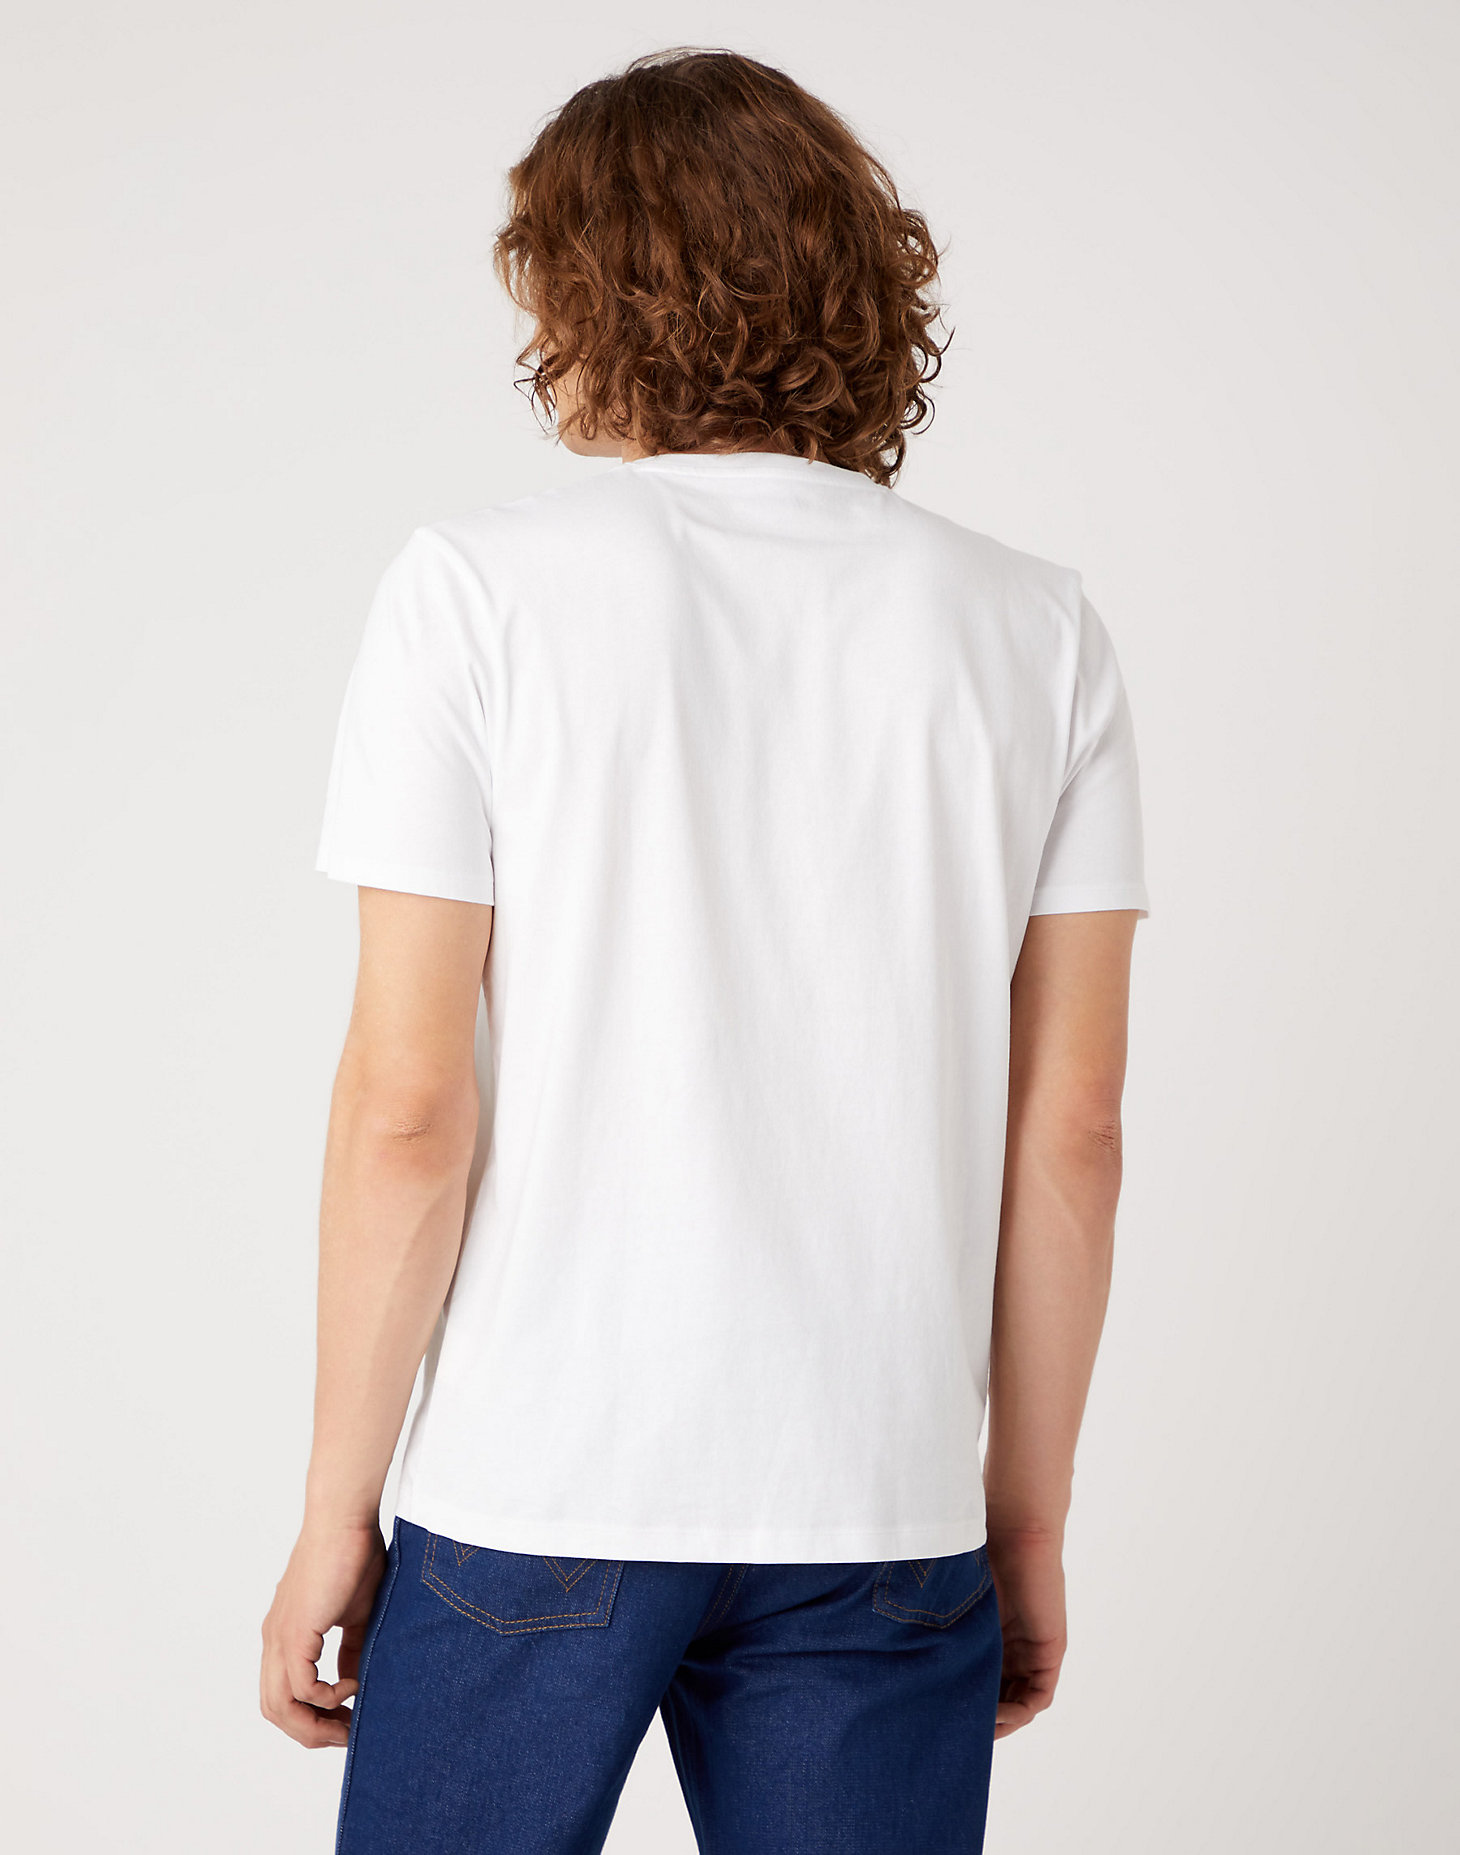 Sign Off Tee in White alternative view 2